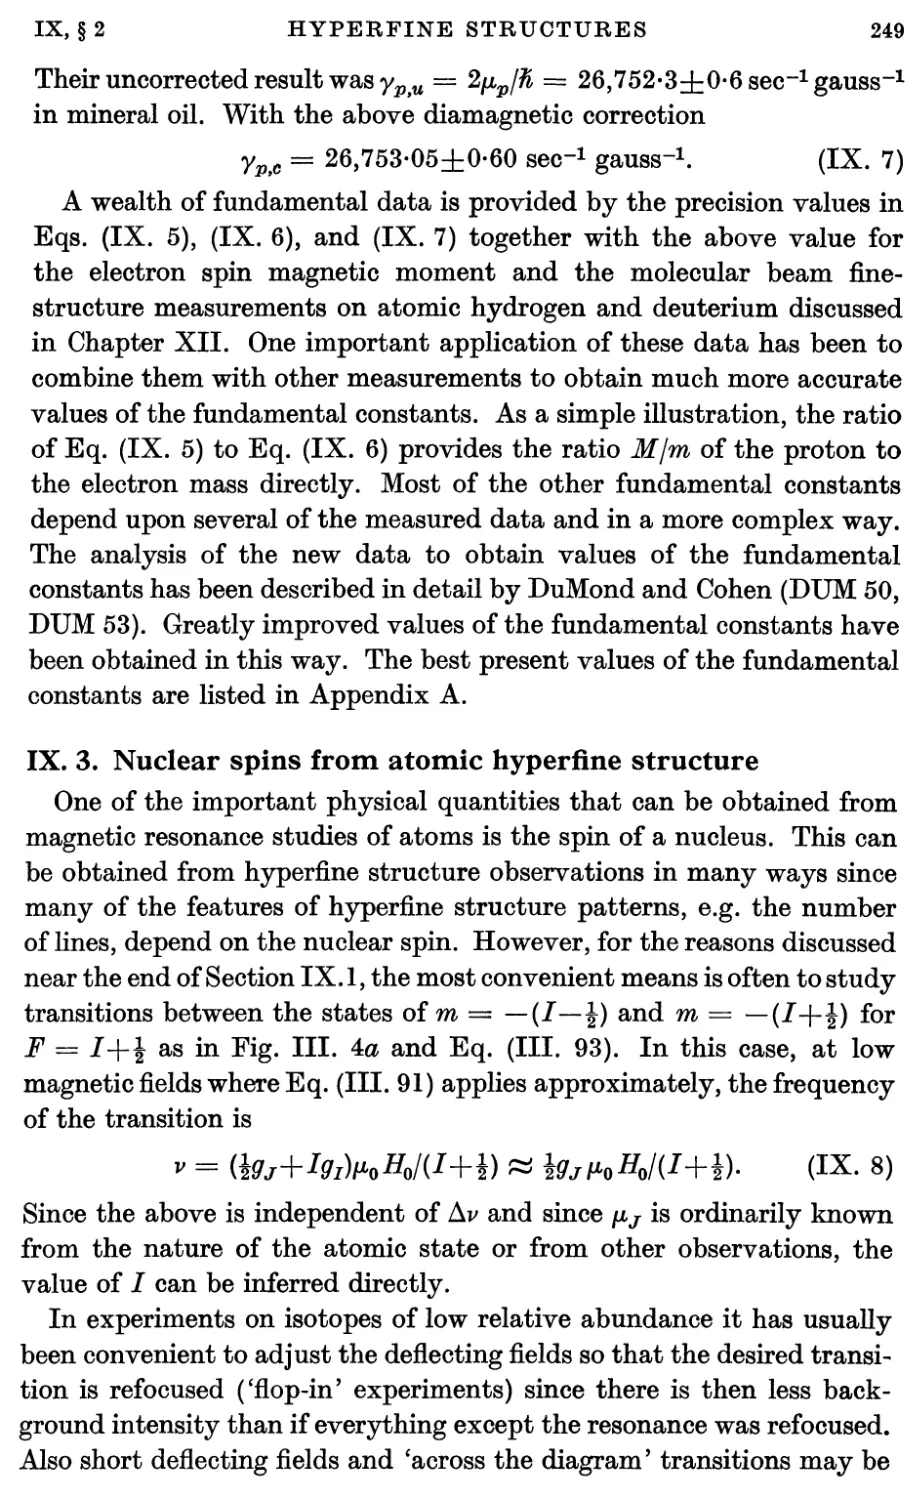 IX.3. Nuclear Spins from Atomic Hyperfine Structure